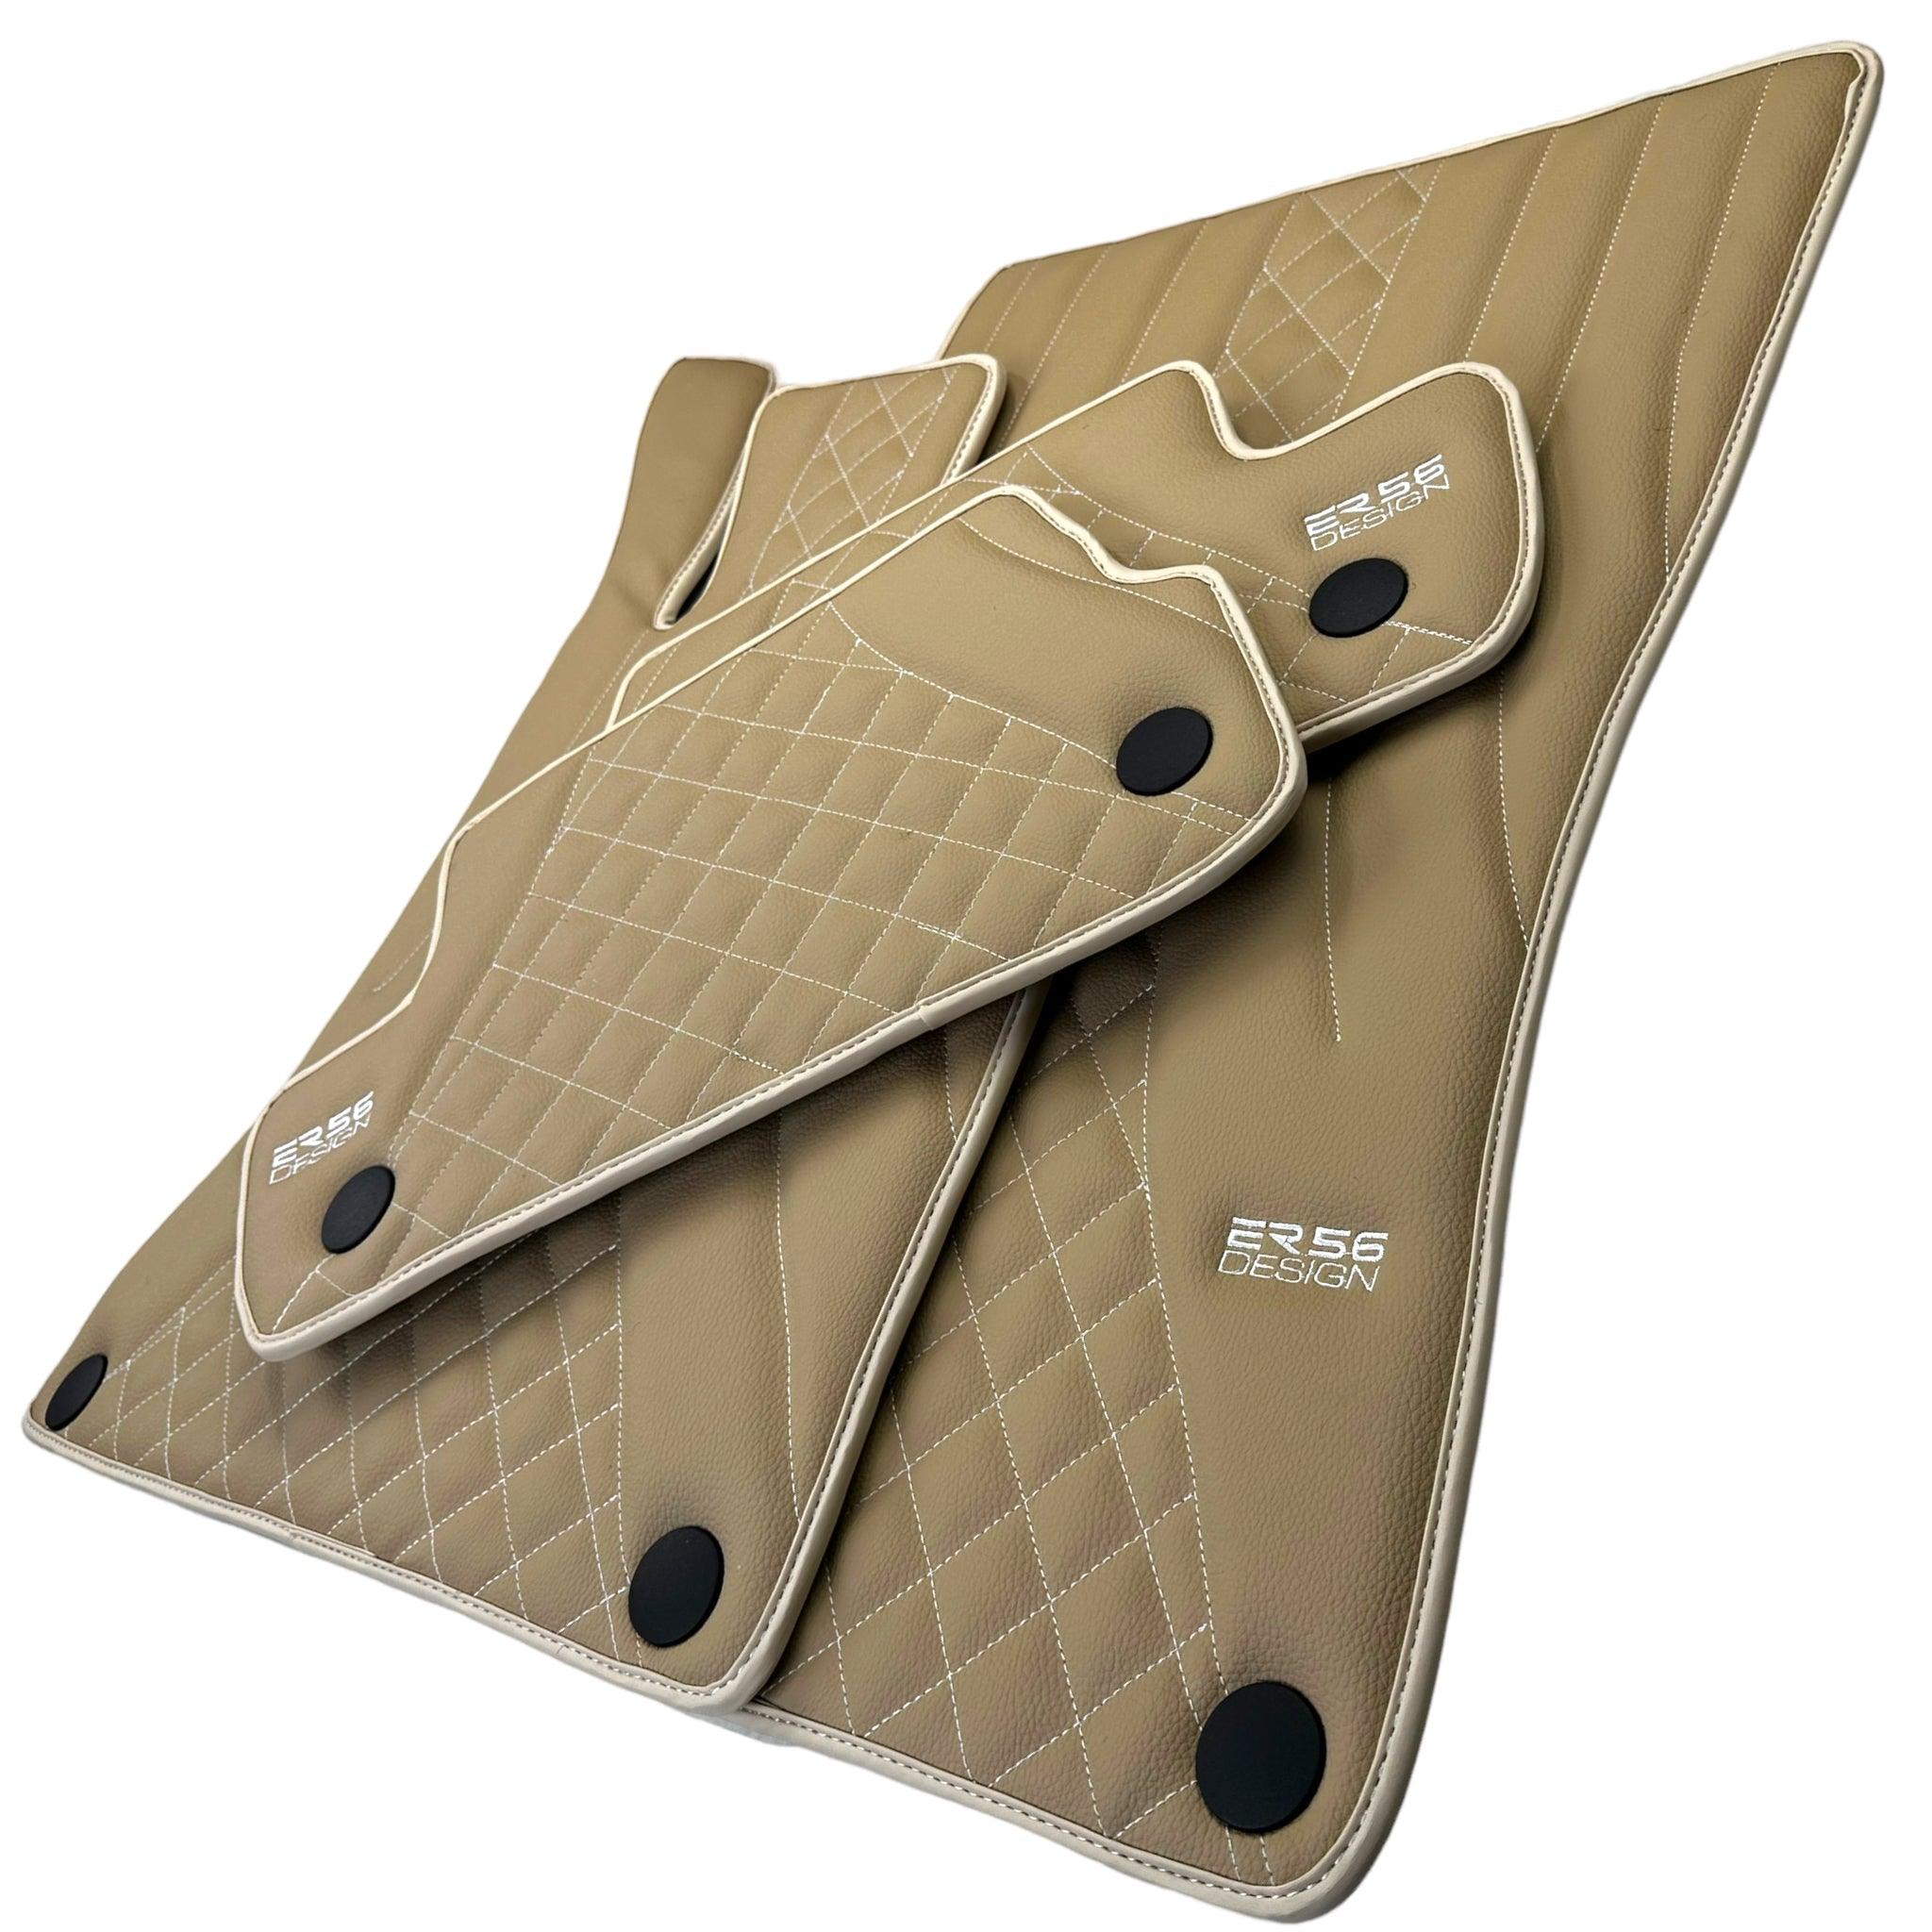 Beige Leather Floor Mats For Mercedes Benz CLS-Class C218 Coupe (2011-2014)